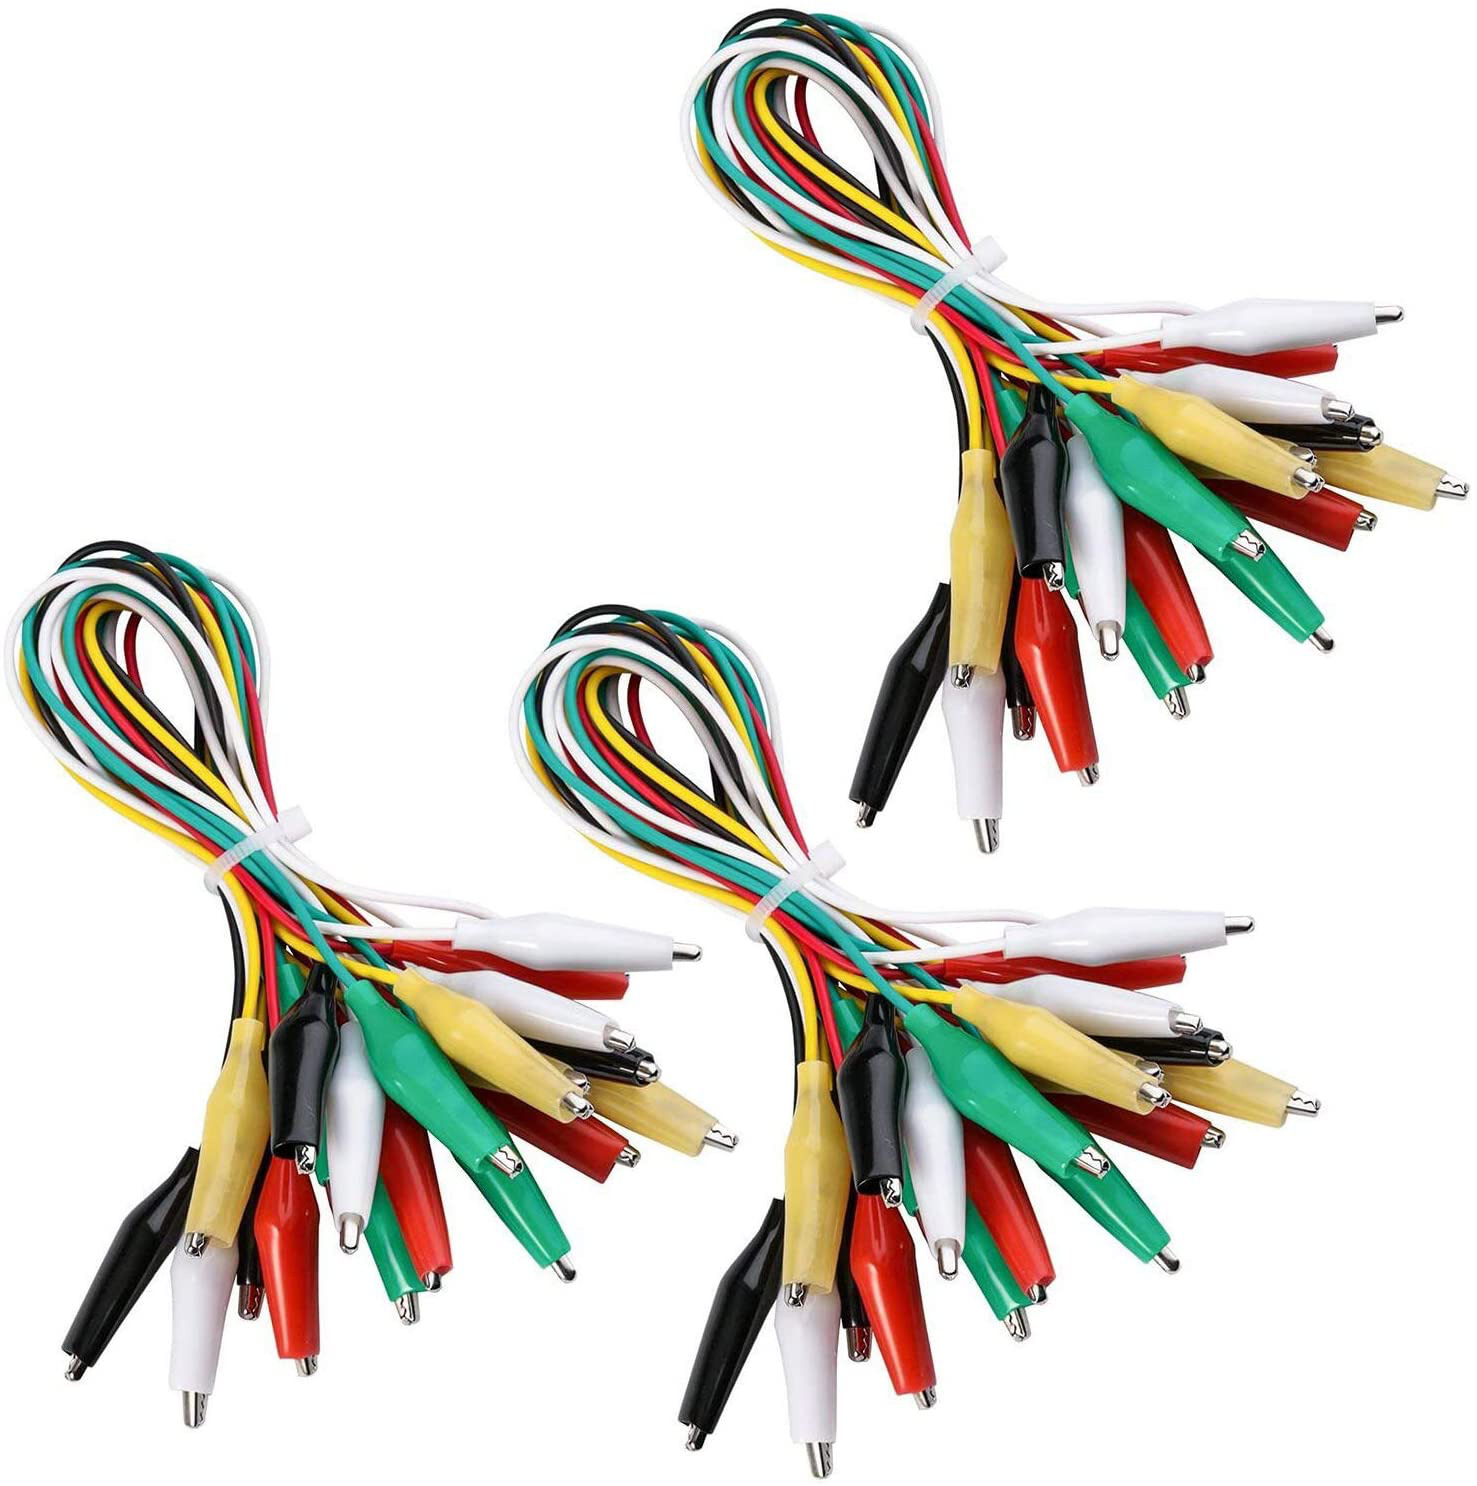 30Pcs Test Leads Set With With Alligator Clips Jumper Cable Wire Double End 50Cm